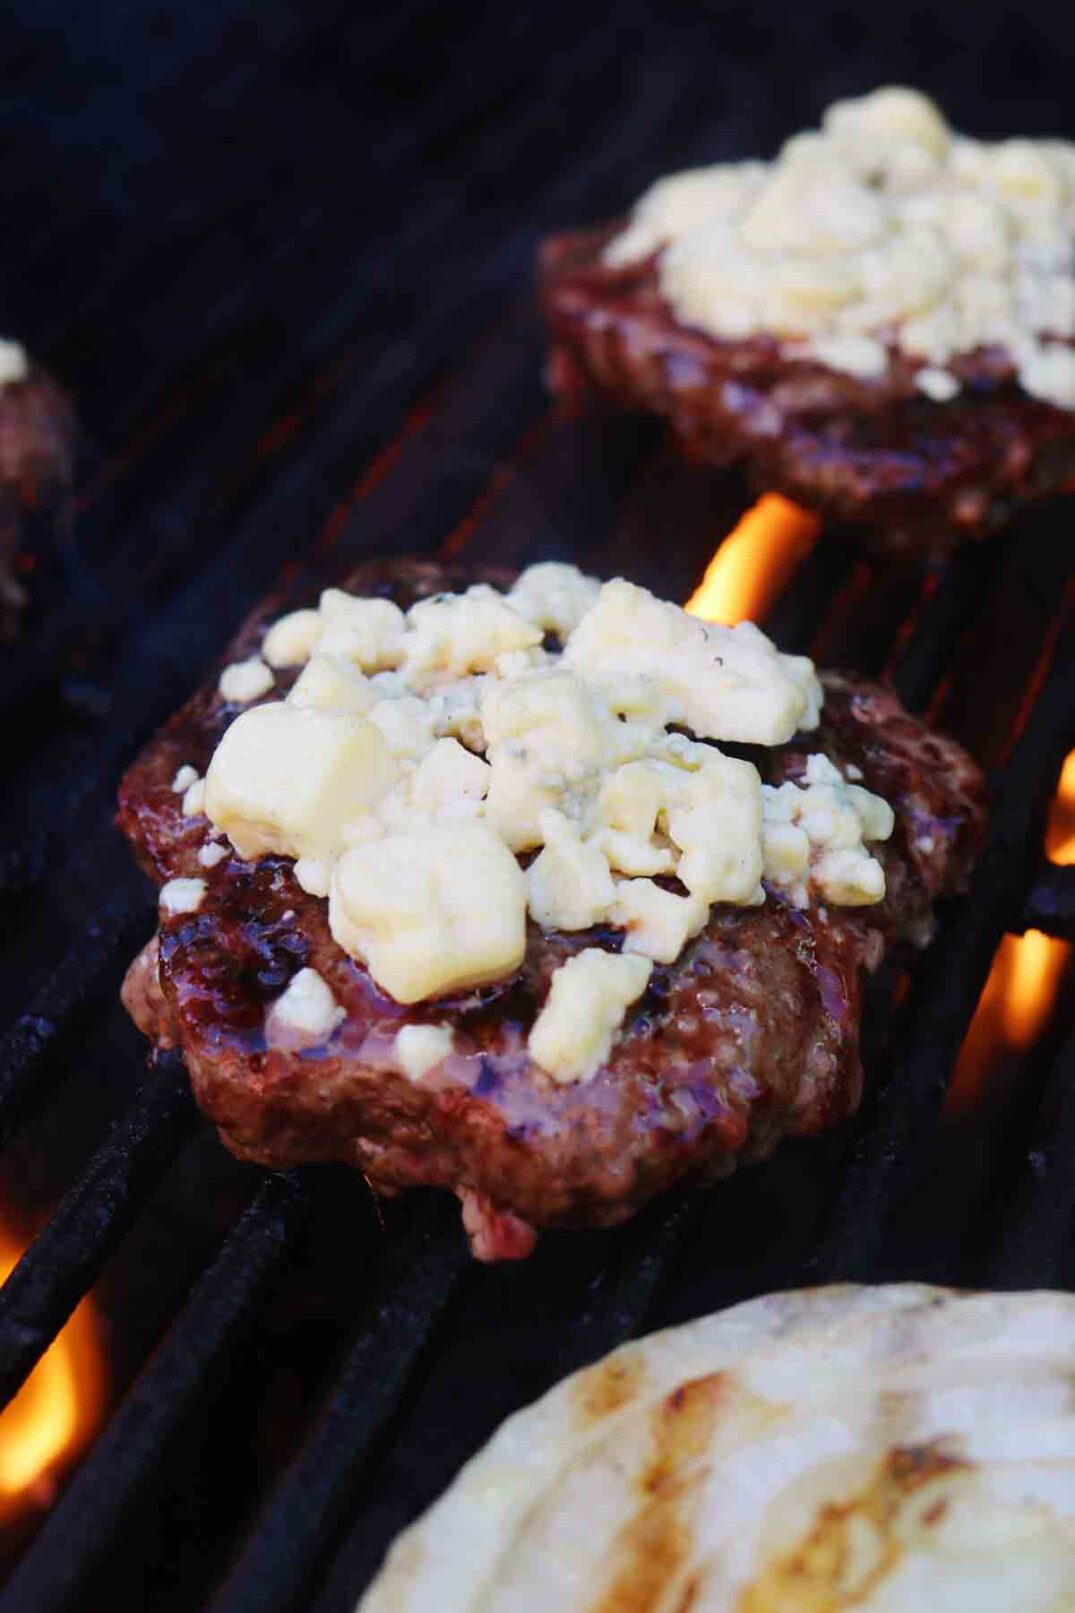 blue cheese crumbles melted onto a beef patty on a grill top.